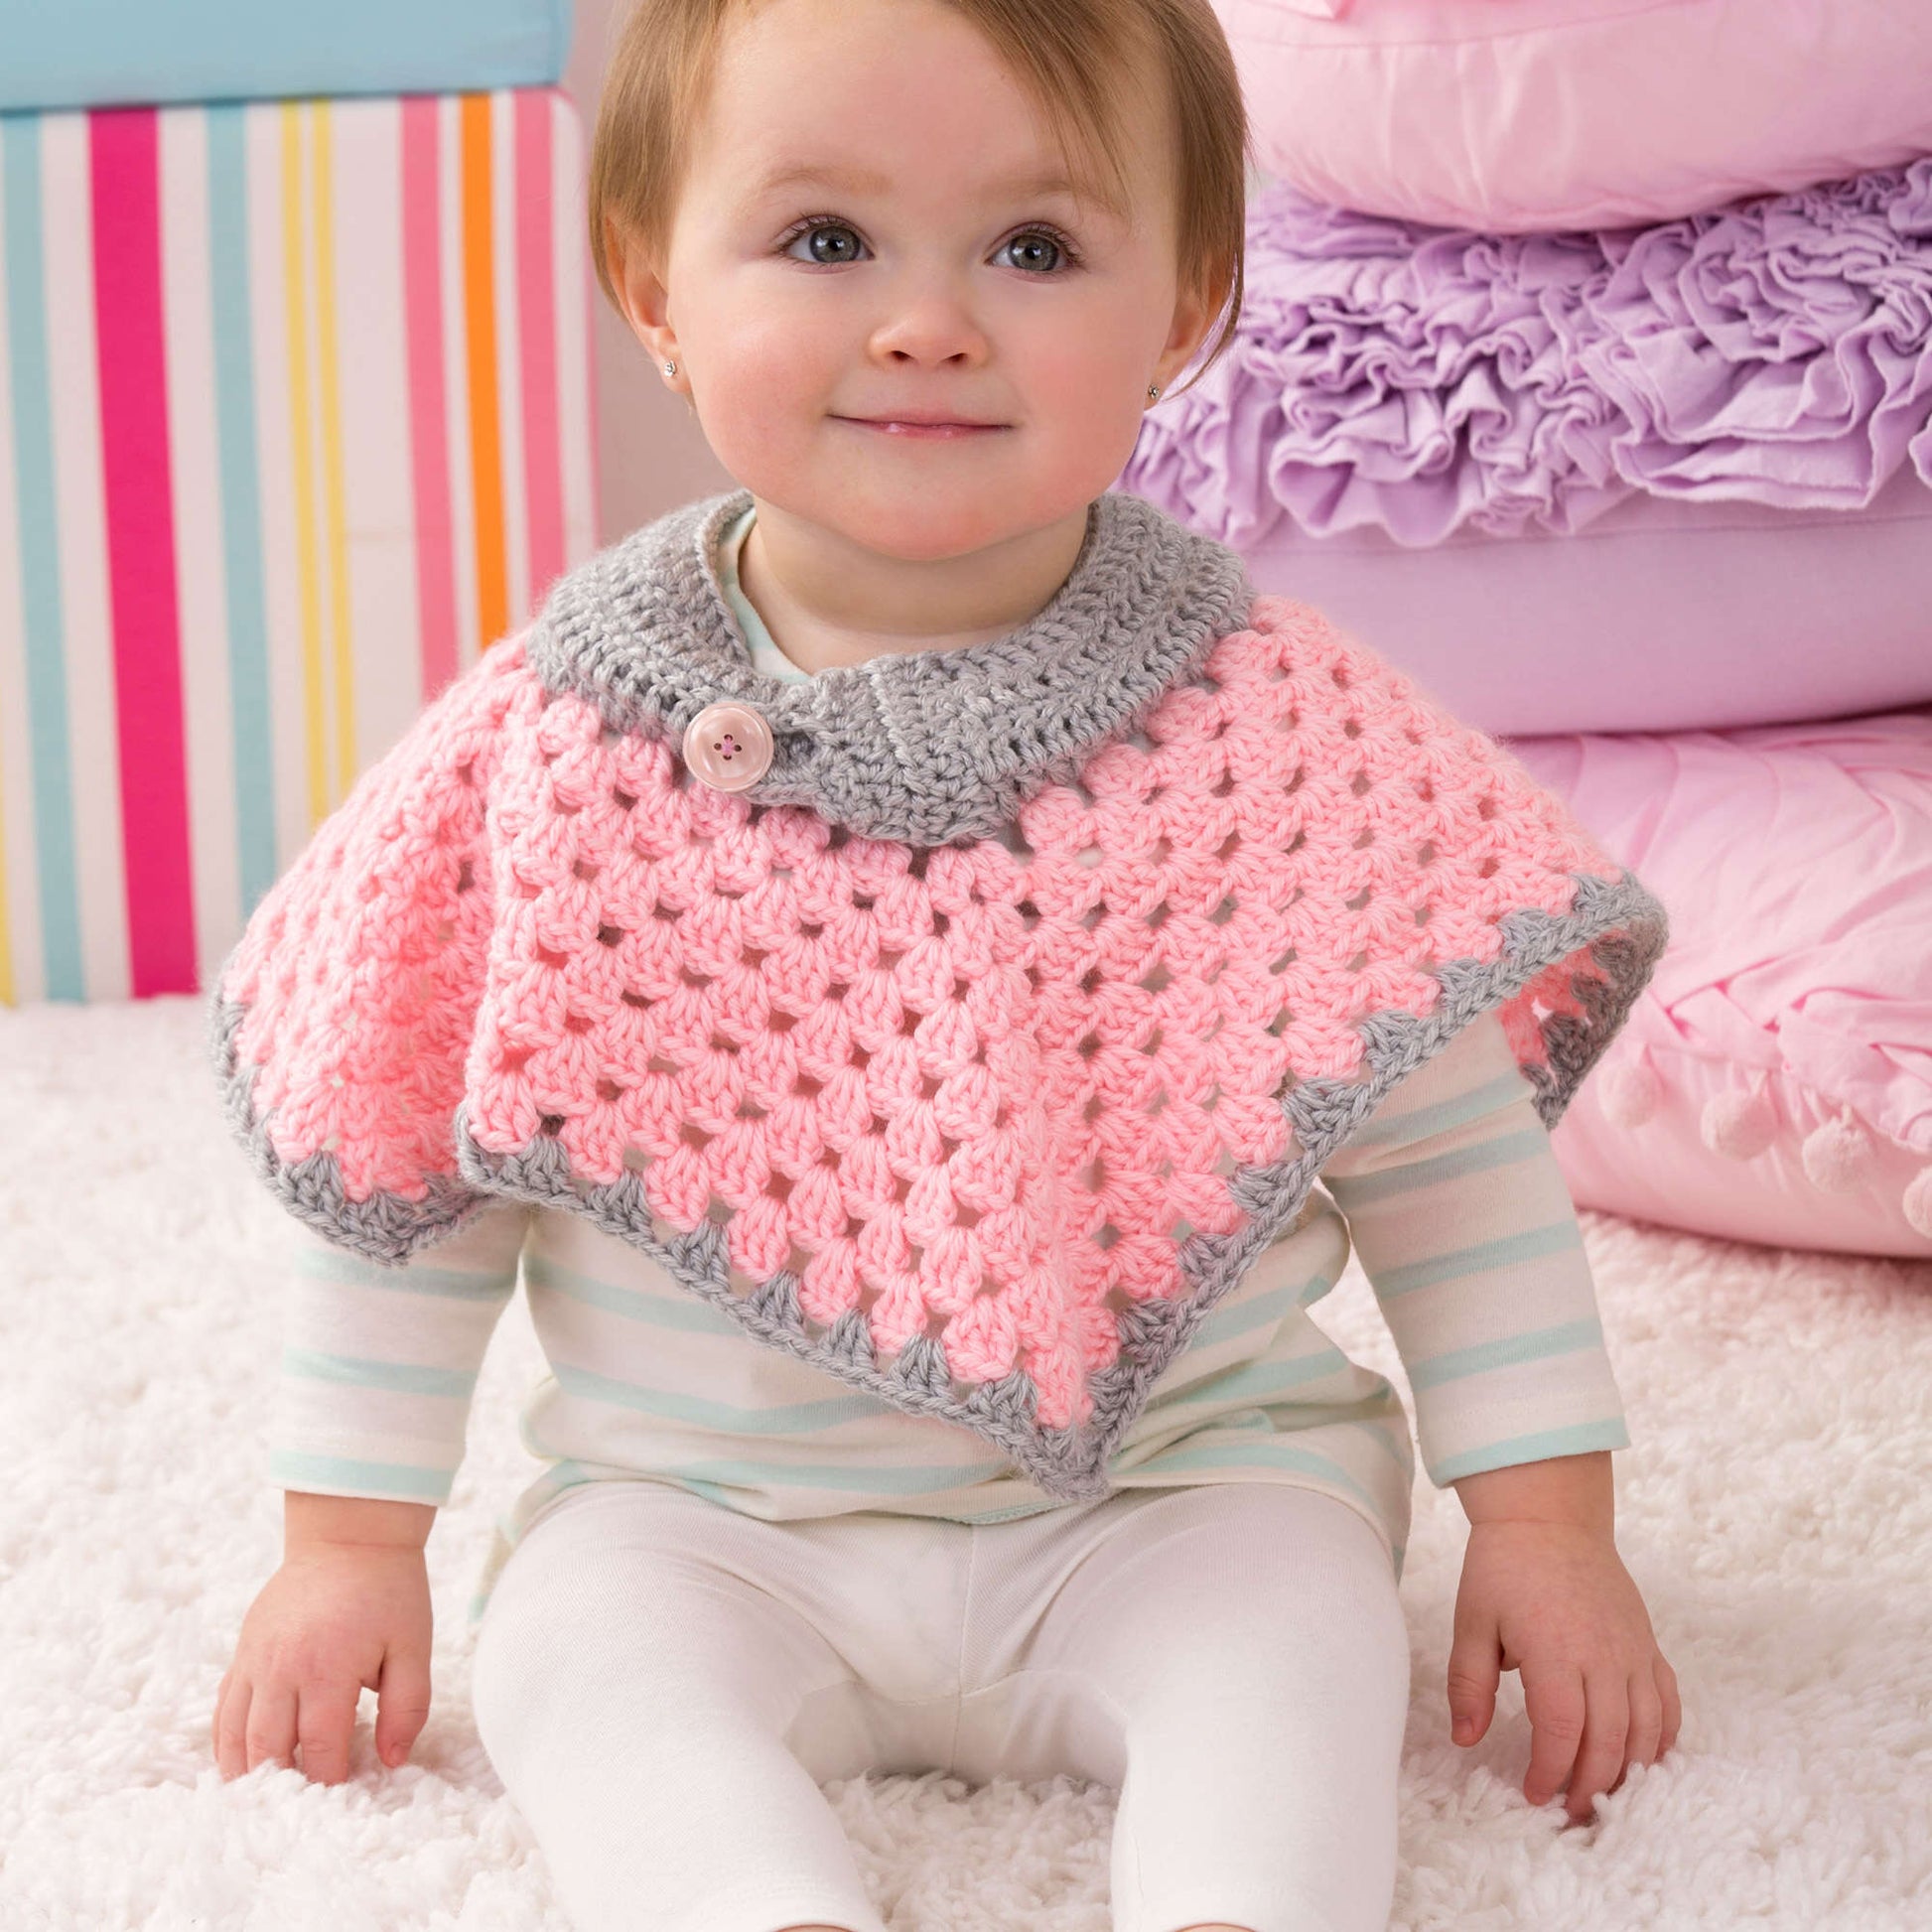 Red Heart Sweet Baby Poncho Pattern | Yarnspirations